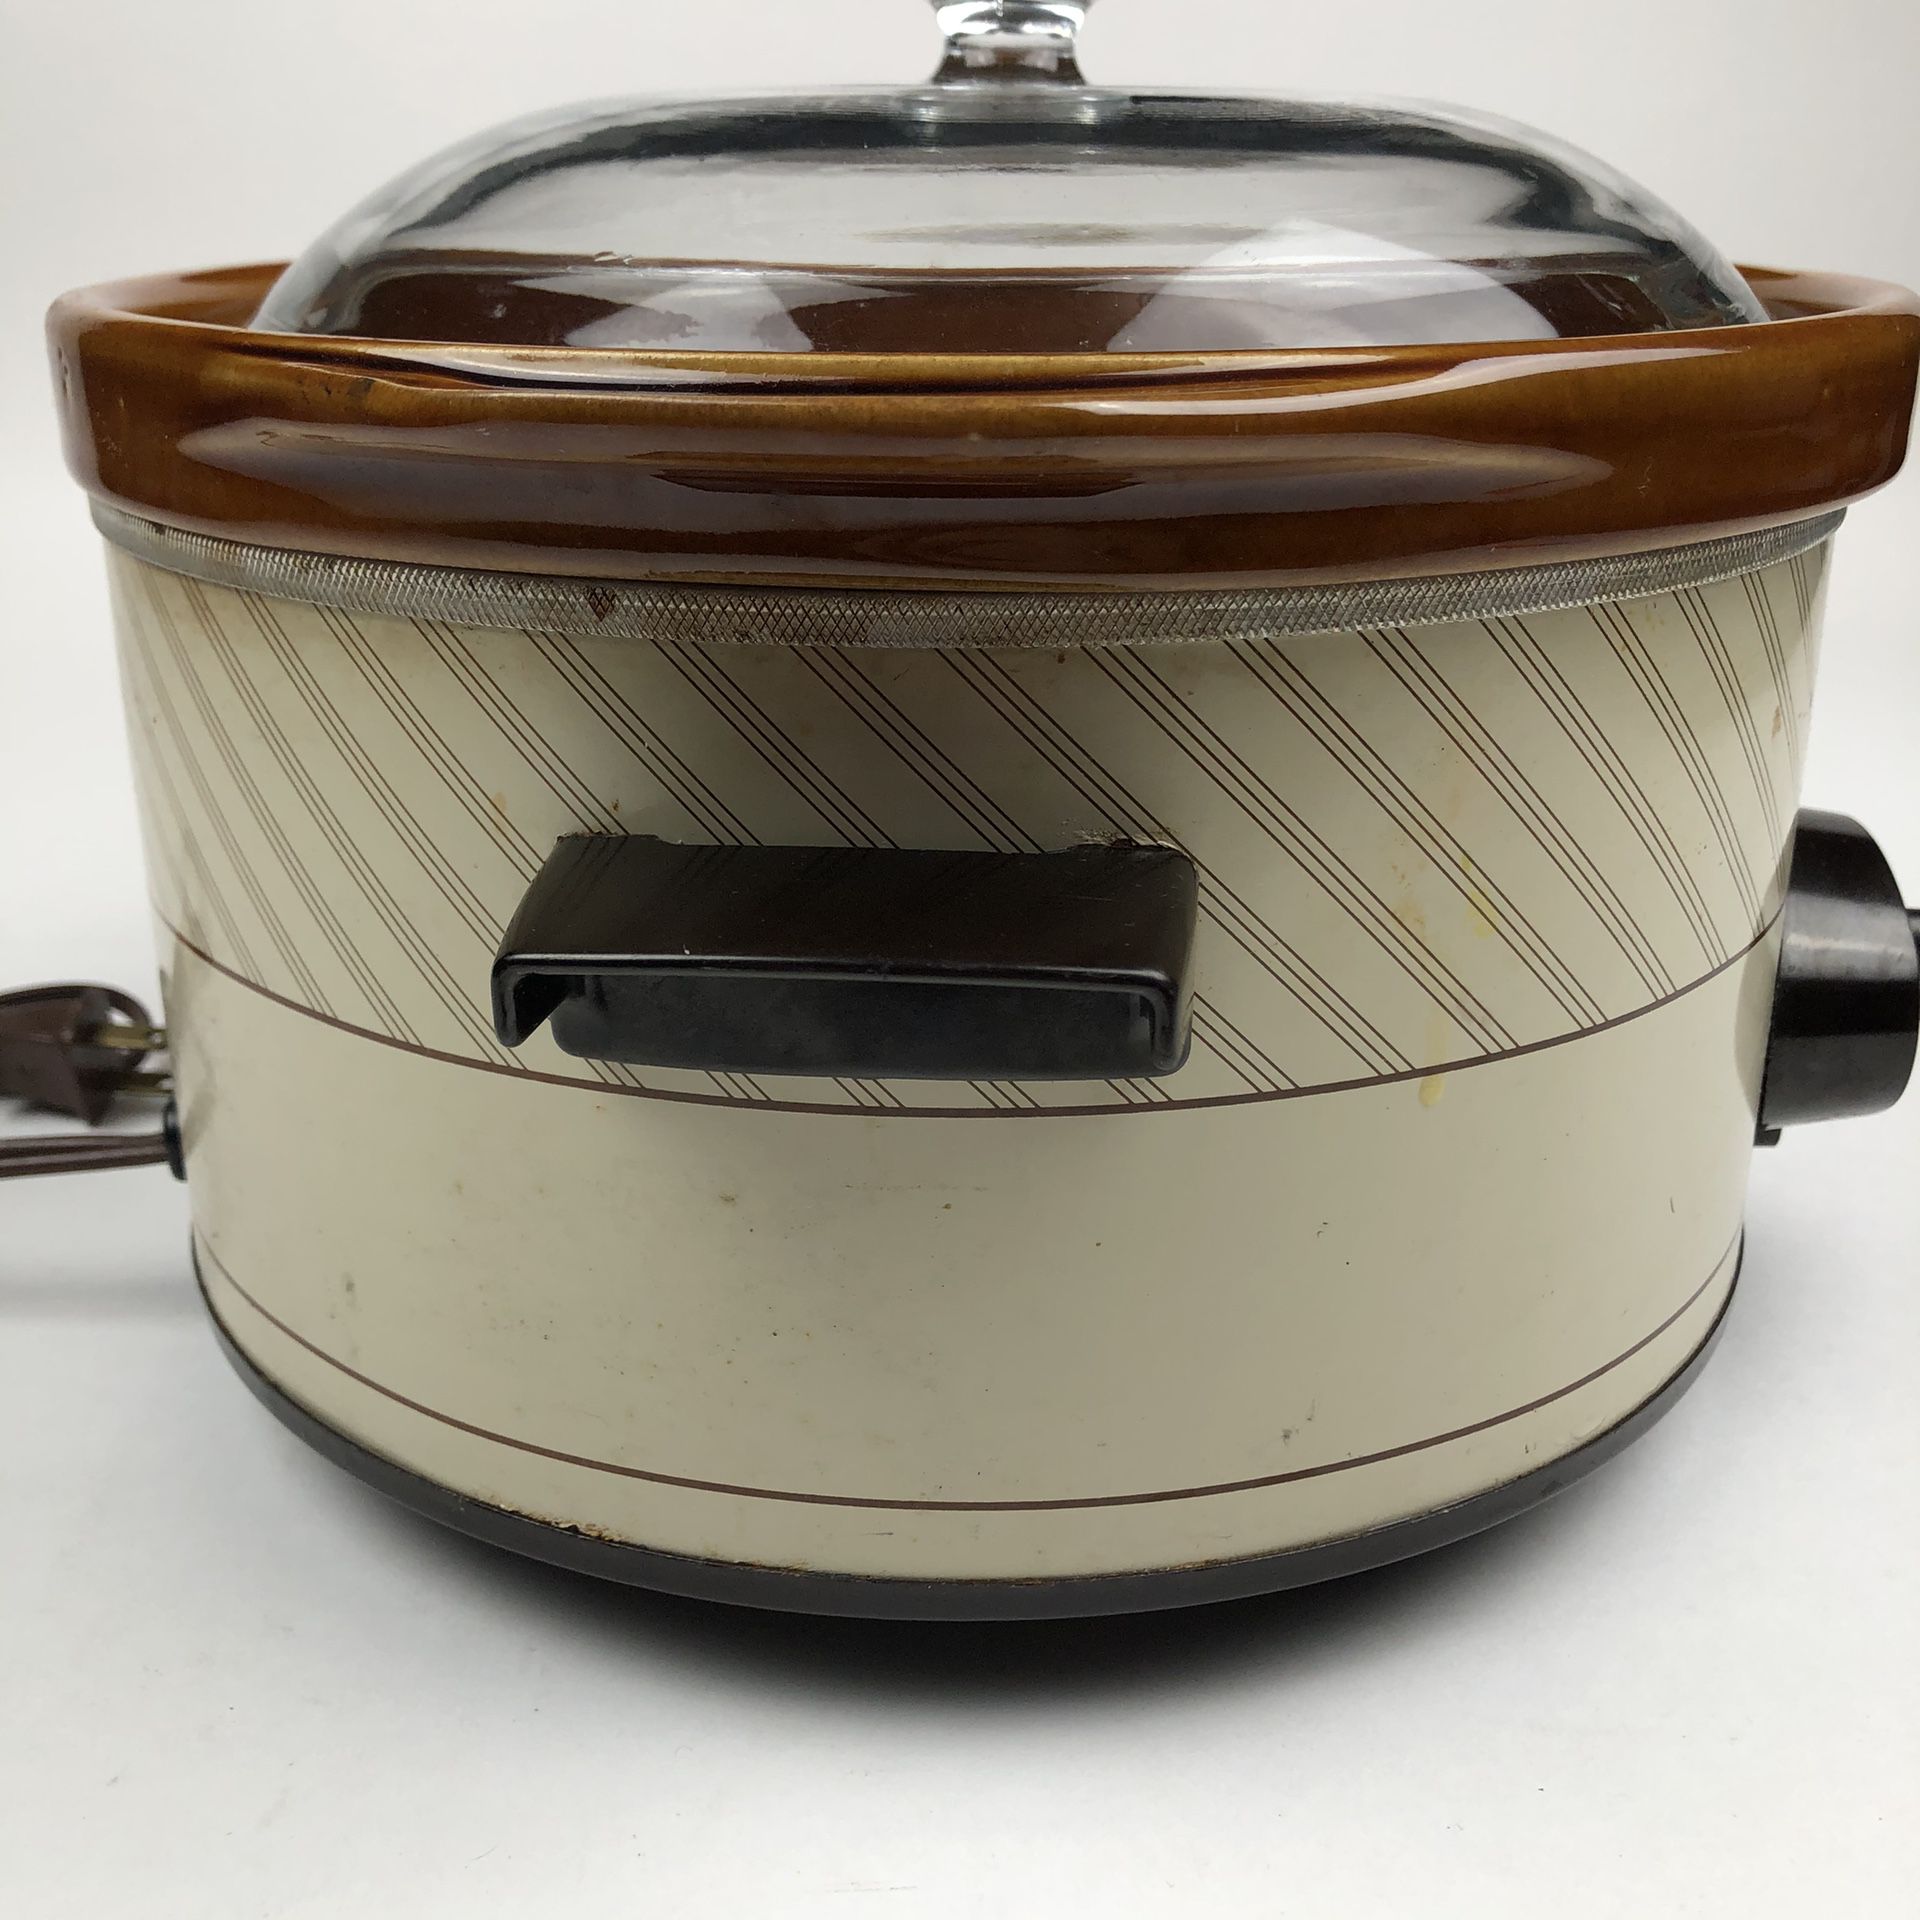 EUC VINTAGE RIVAL 3150/1 3.5 QT. SLOW COOKER CROCK POT MADE IN USA VERY  CLEAN